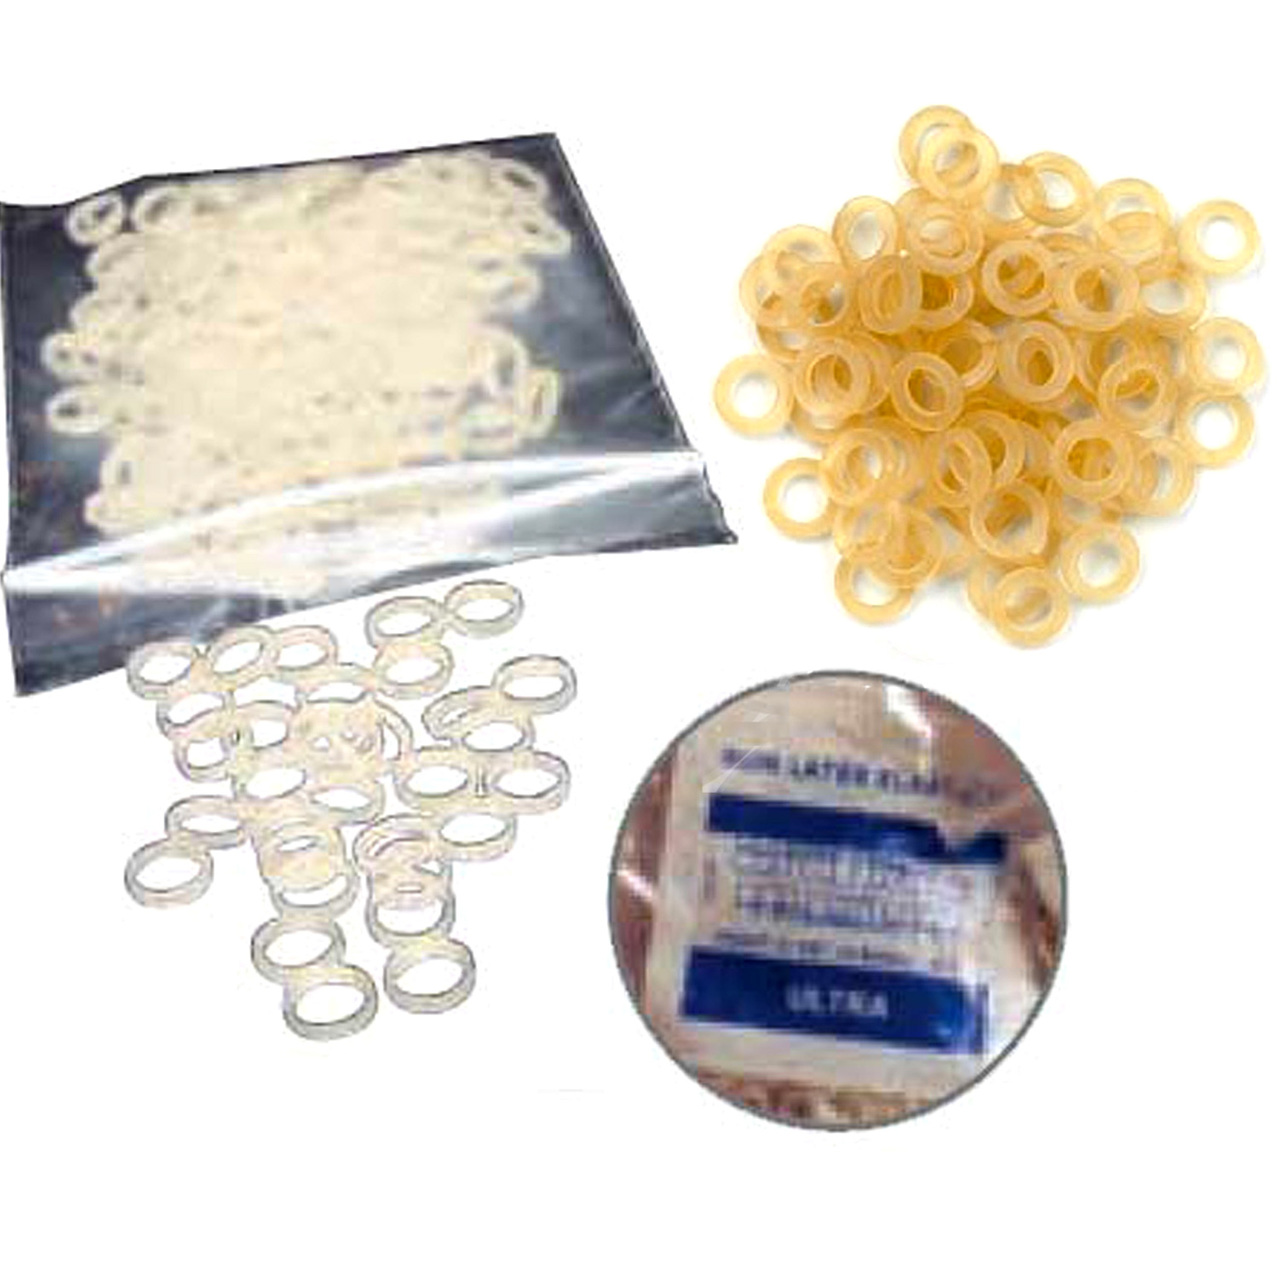 non latex rubber bands for braces